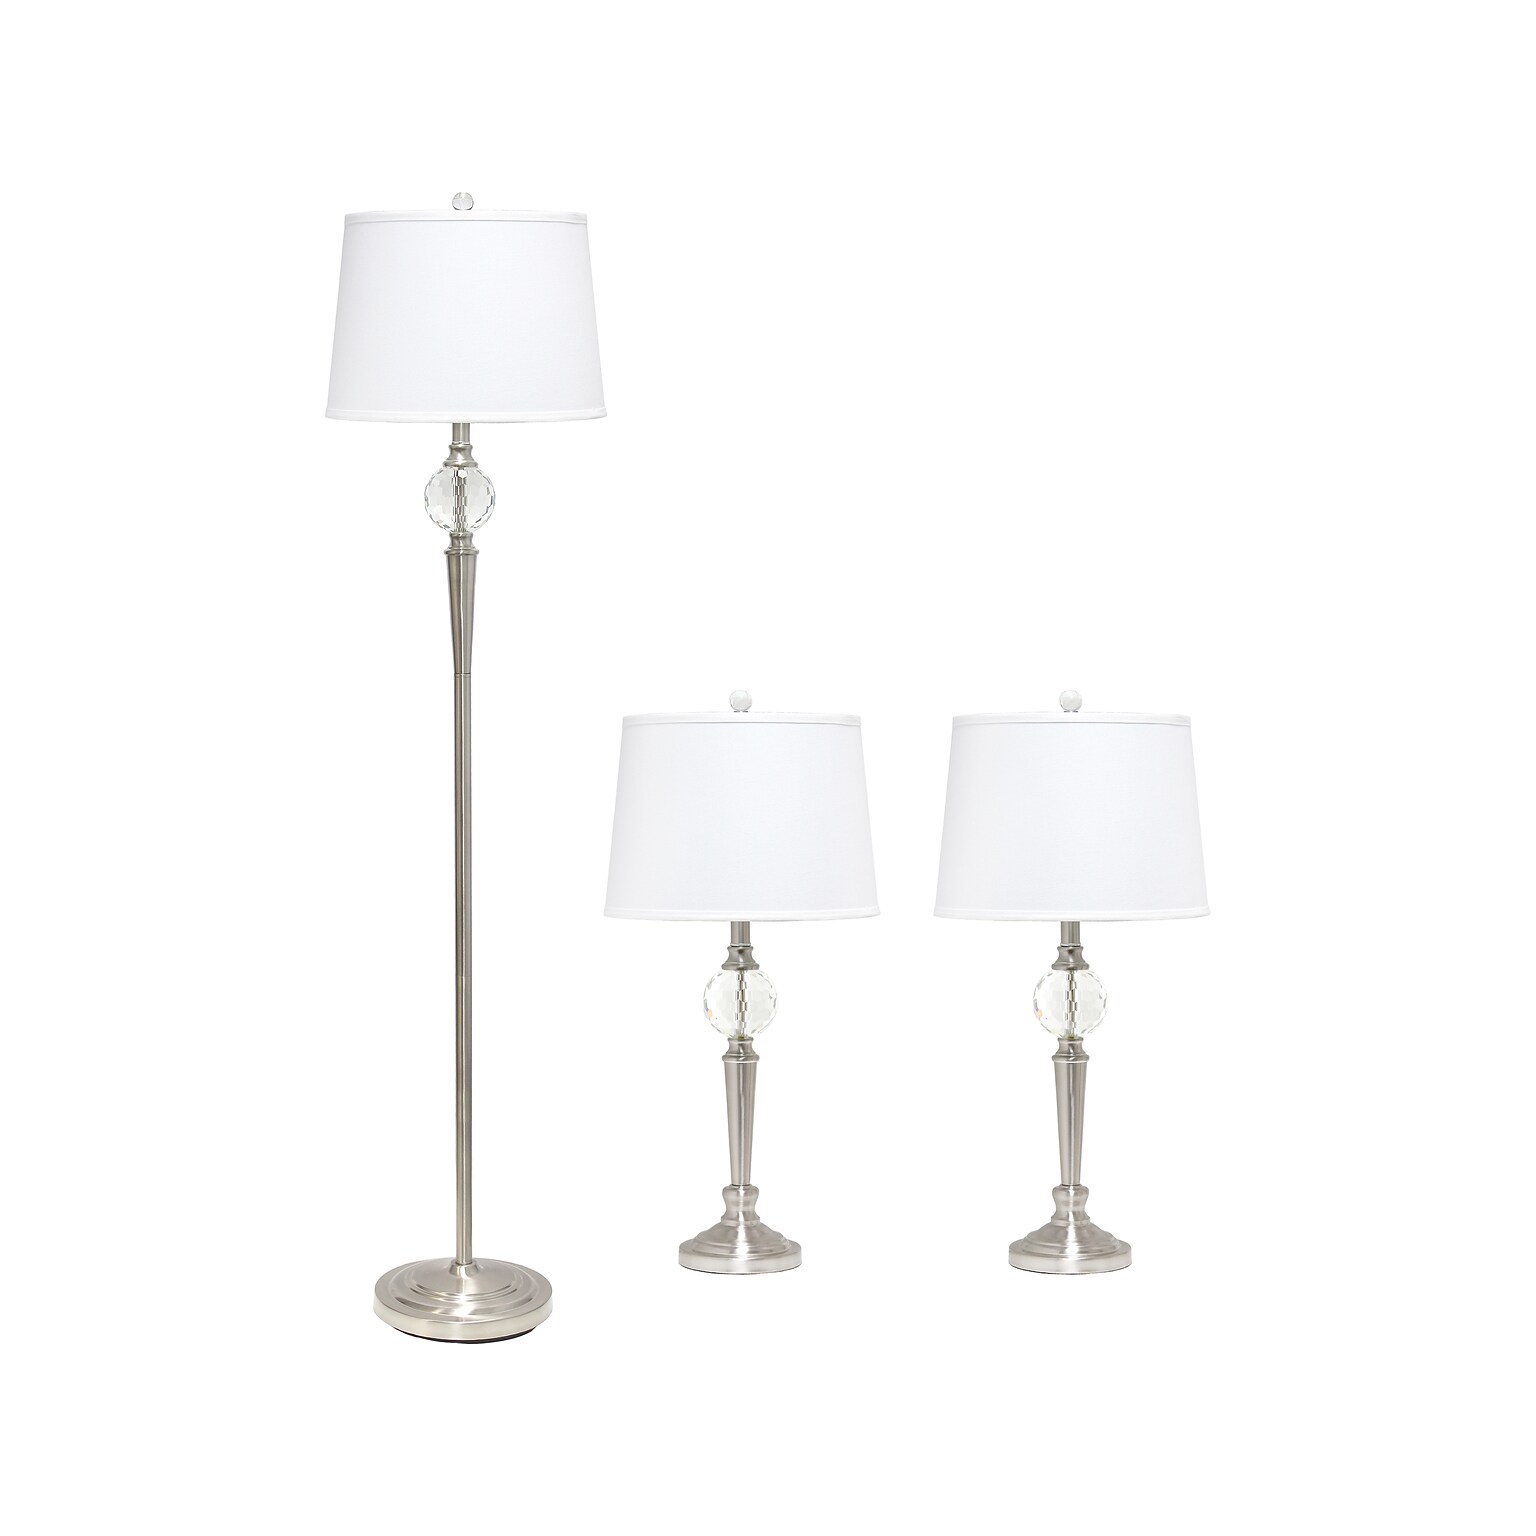 Lalia Home Classix 63/29 Brushed Nickel Three-Piece Floor/Table Lamp Set with Tapered Shades (LHS-1000-BN)